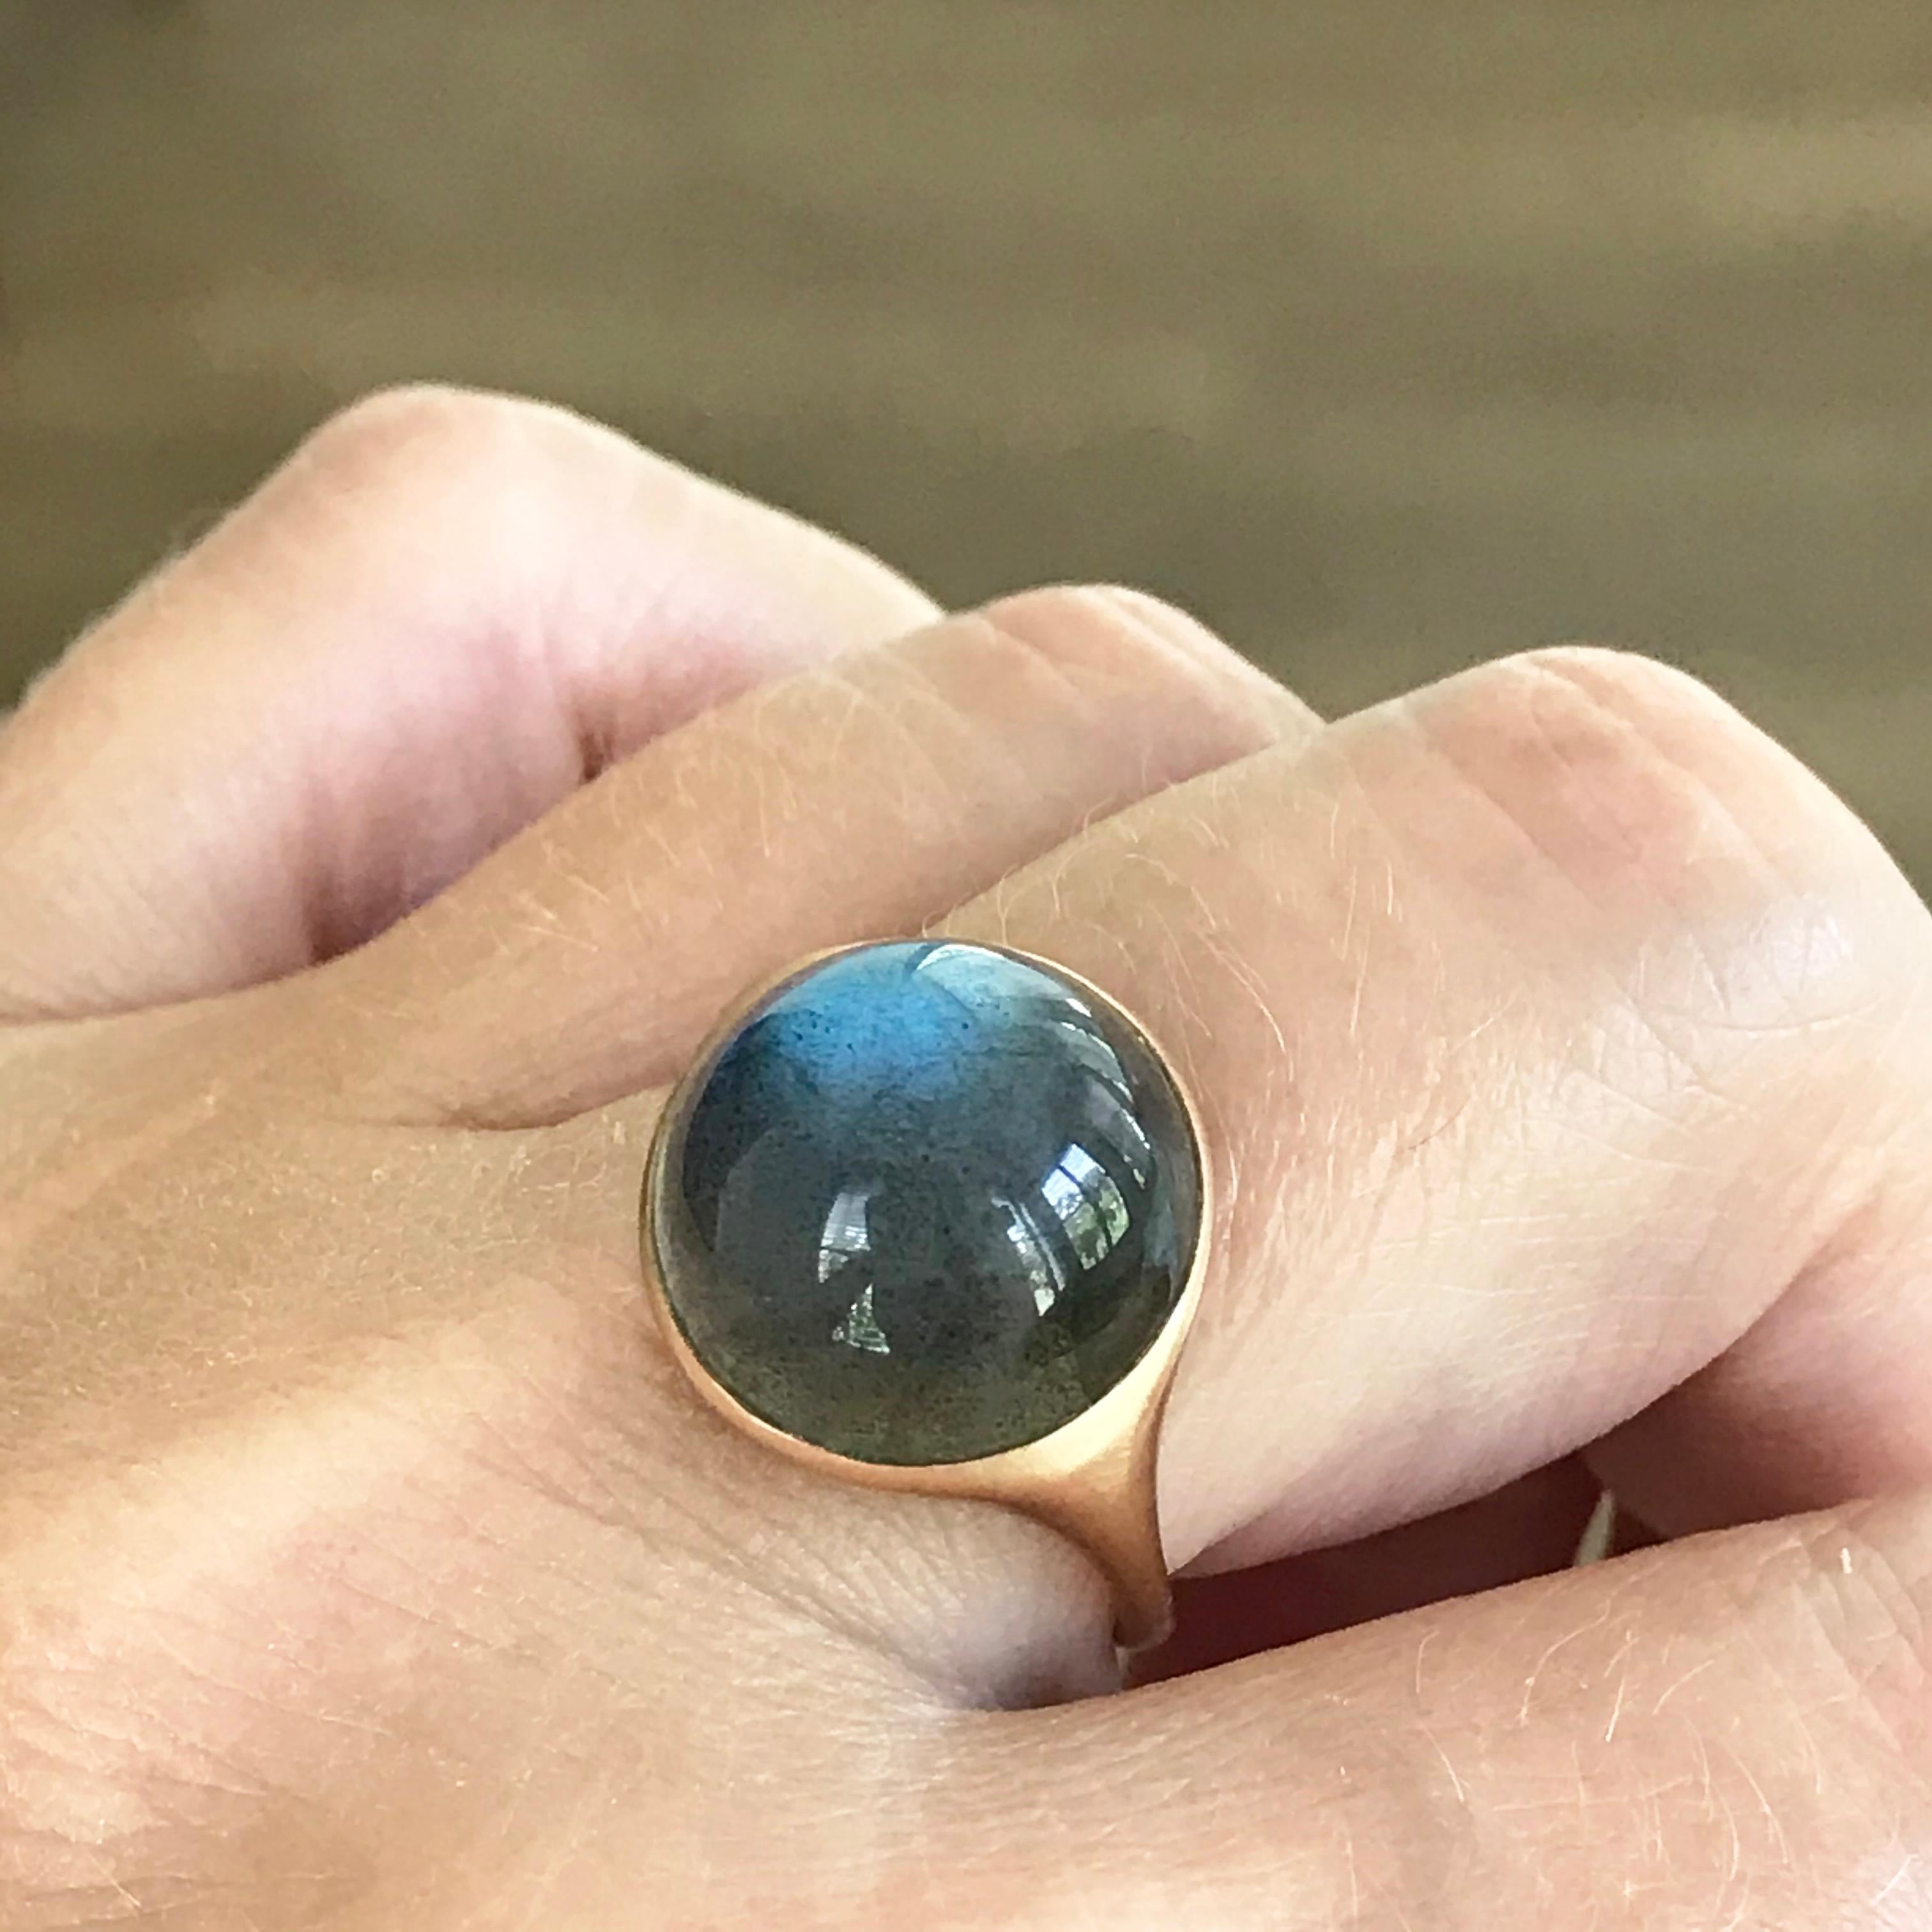 Dalben design 18k rose gold satin finishing ring with a  11,8 carat bezel-set round cabochon labradorite .
Ring size 7 1/4 - EU 55 re-sizable to most finger sizes.
Bezel setting dimension: 
width 15,5 mm, 
height 15,5 mm. 
The ring has been designed